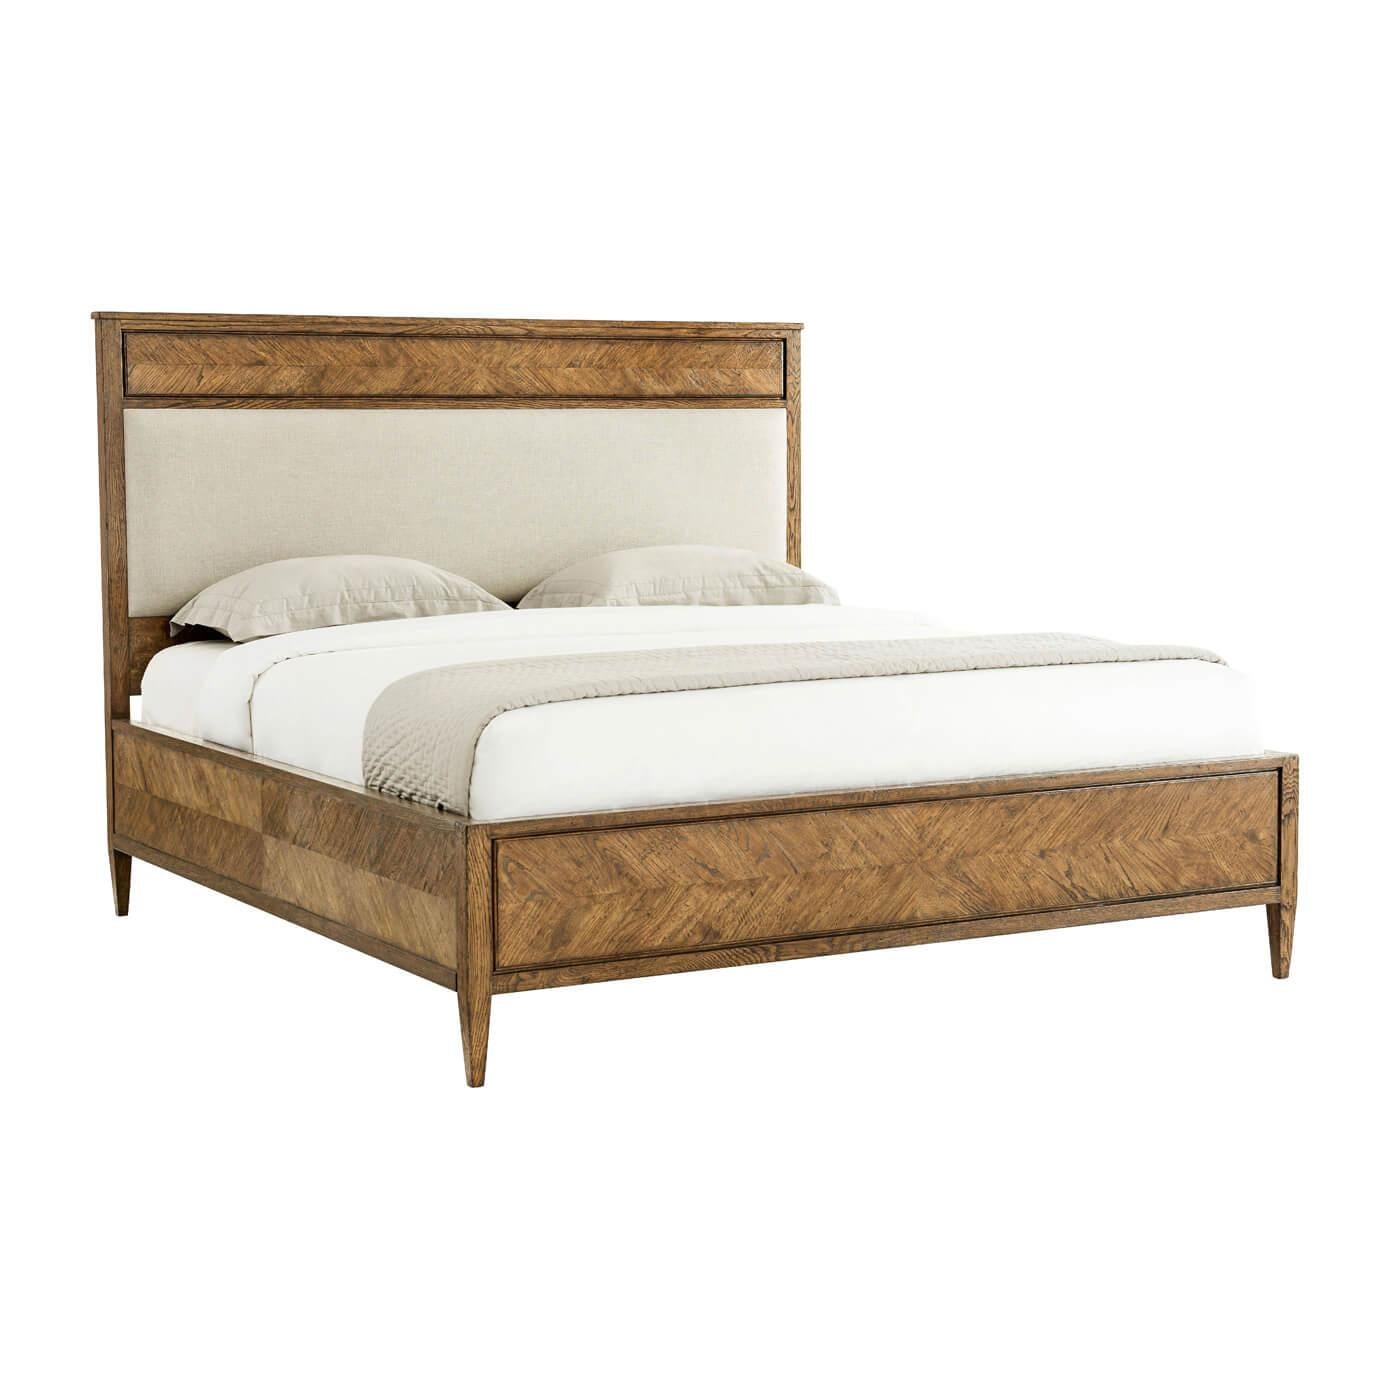 Herringbone Parquetry Queen Bed - Light Oak In New Condition For Sale In Westwood, NJ